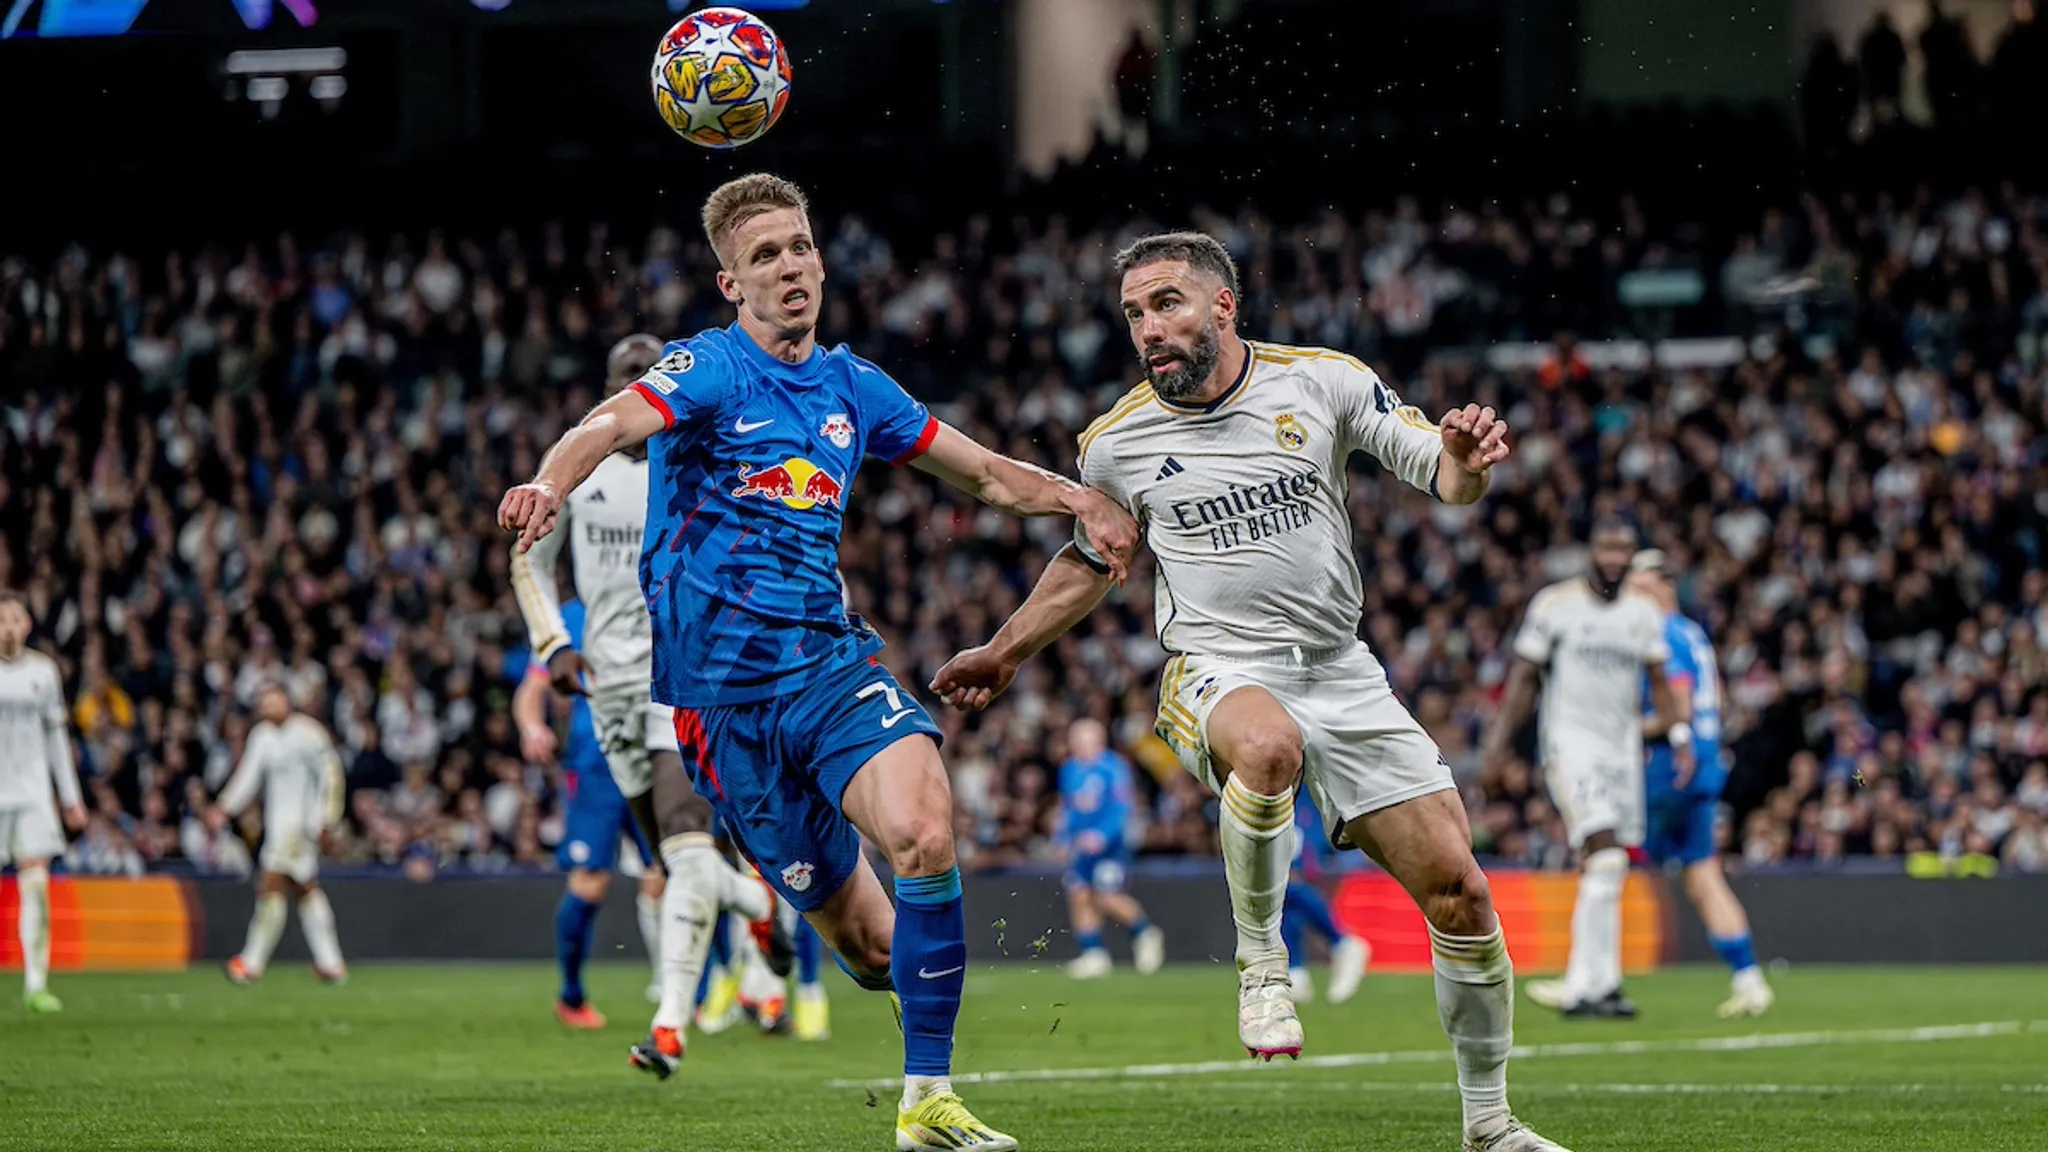 Dani Olmo in a duel with Daniel Carvajal (Real Madrid).